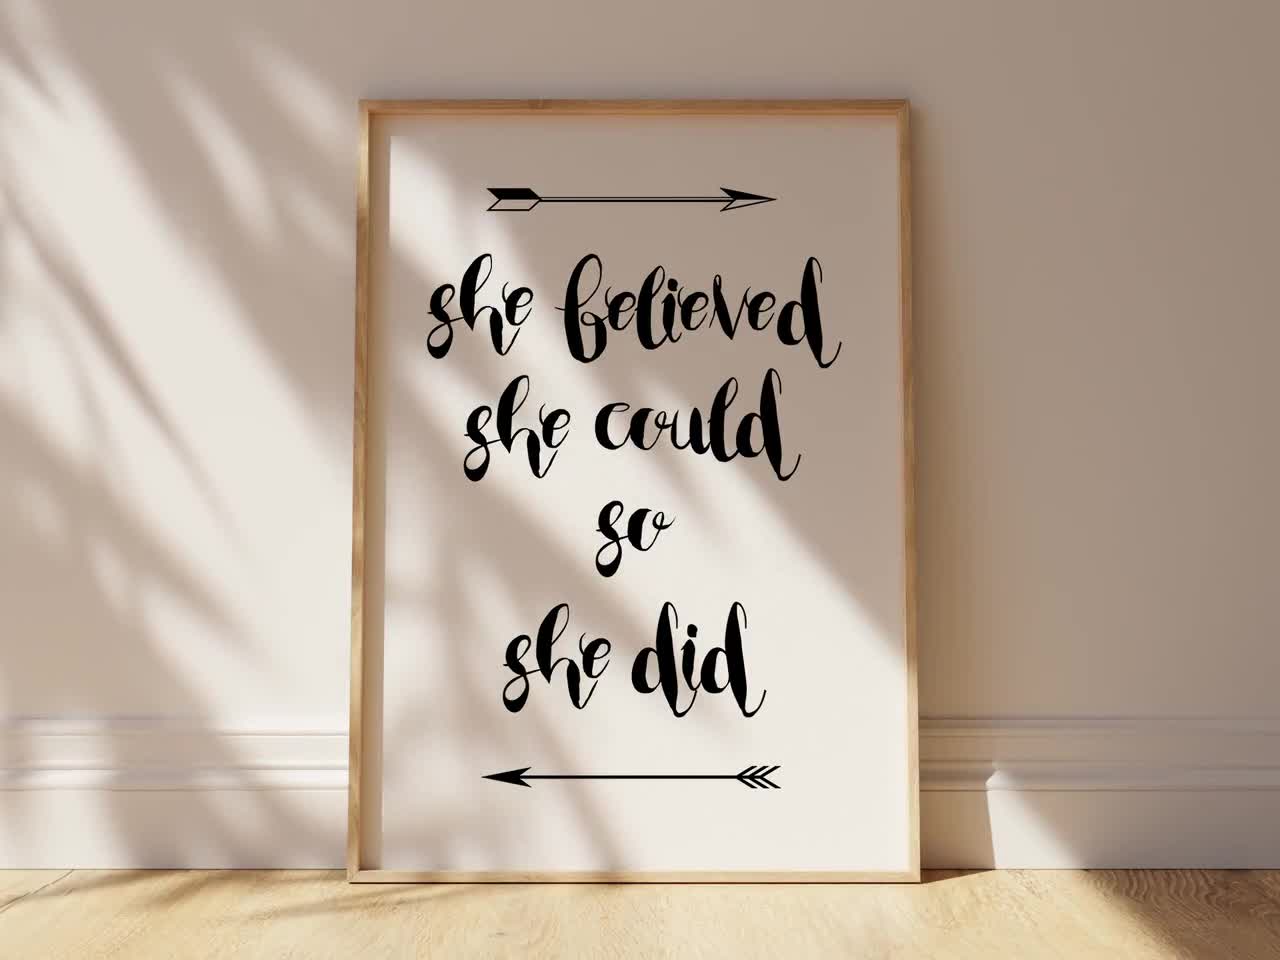 Feminist Pictures, Picture, Believed Could Girls Wall She Teen Art Etsy Decor, Monochrome Did so She - Poster, It Girl Quotes, Gift, Room Quote She